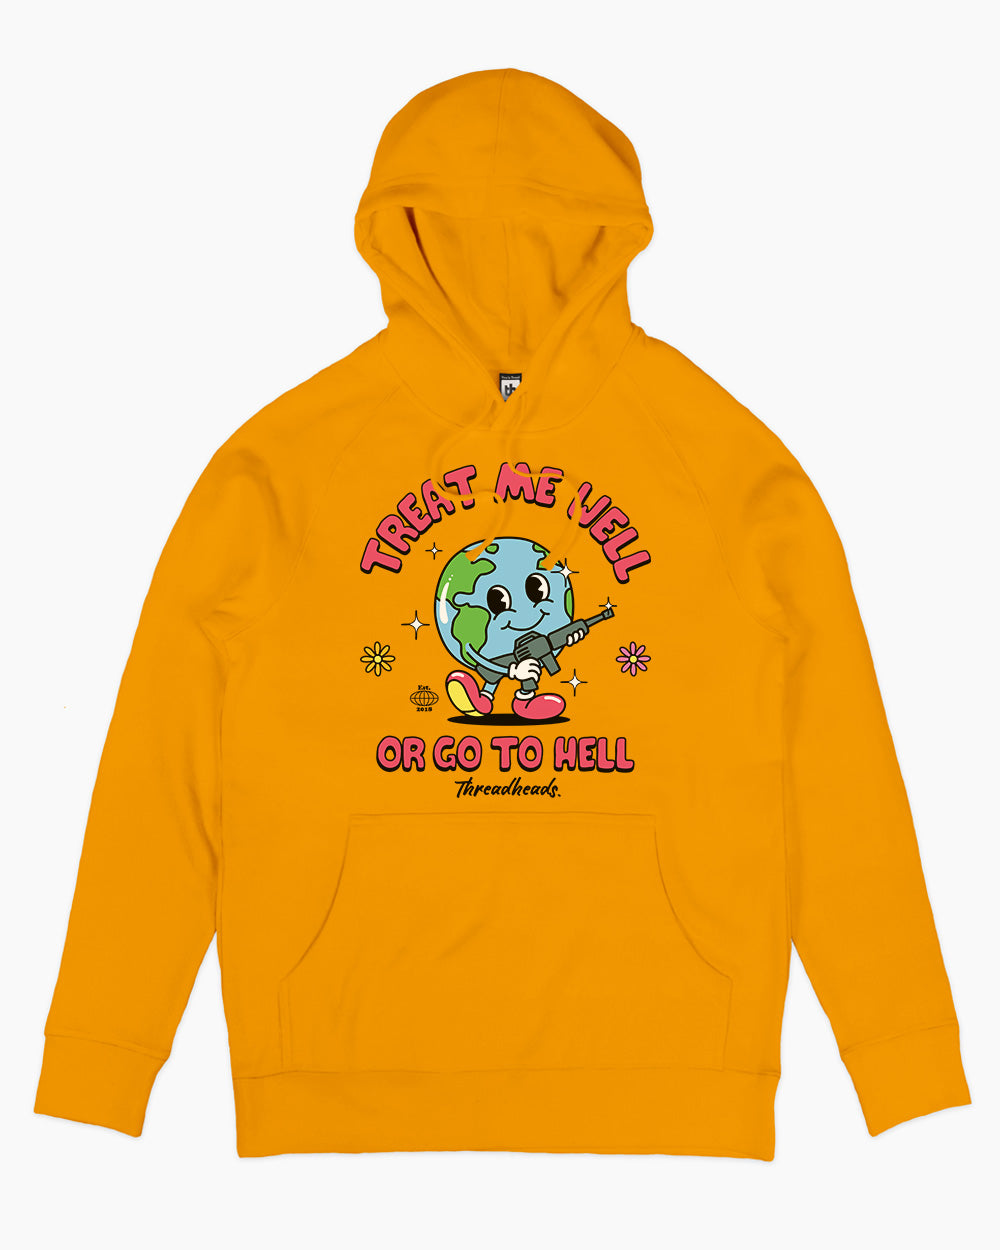 Treat Me Well Or Go To Hell Hoodie